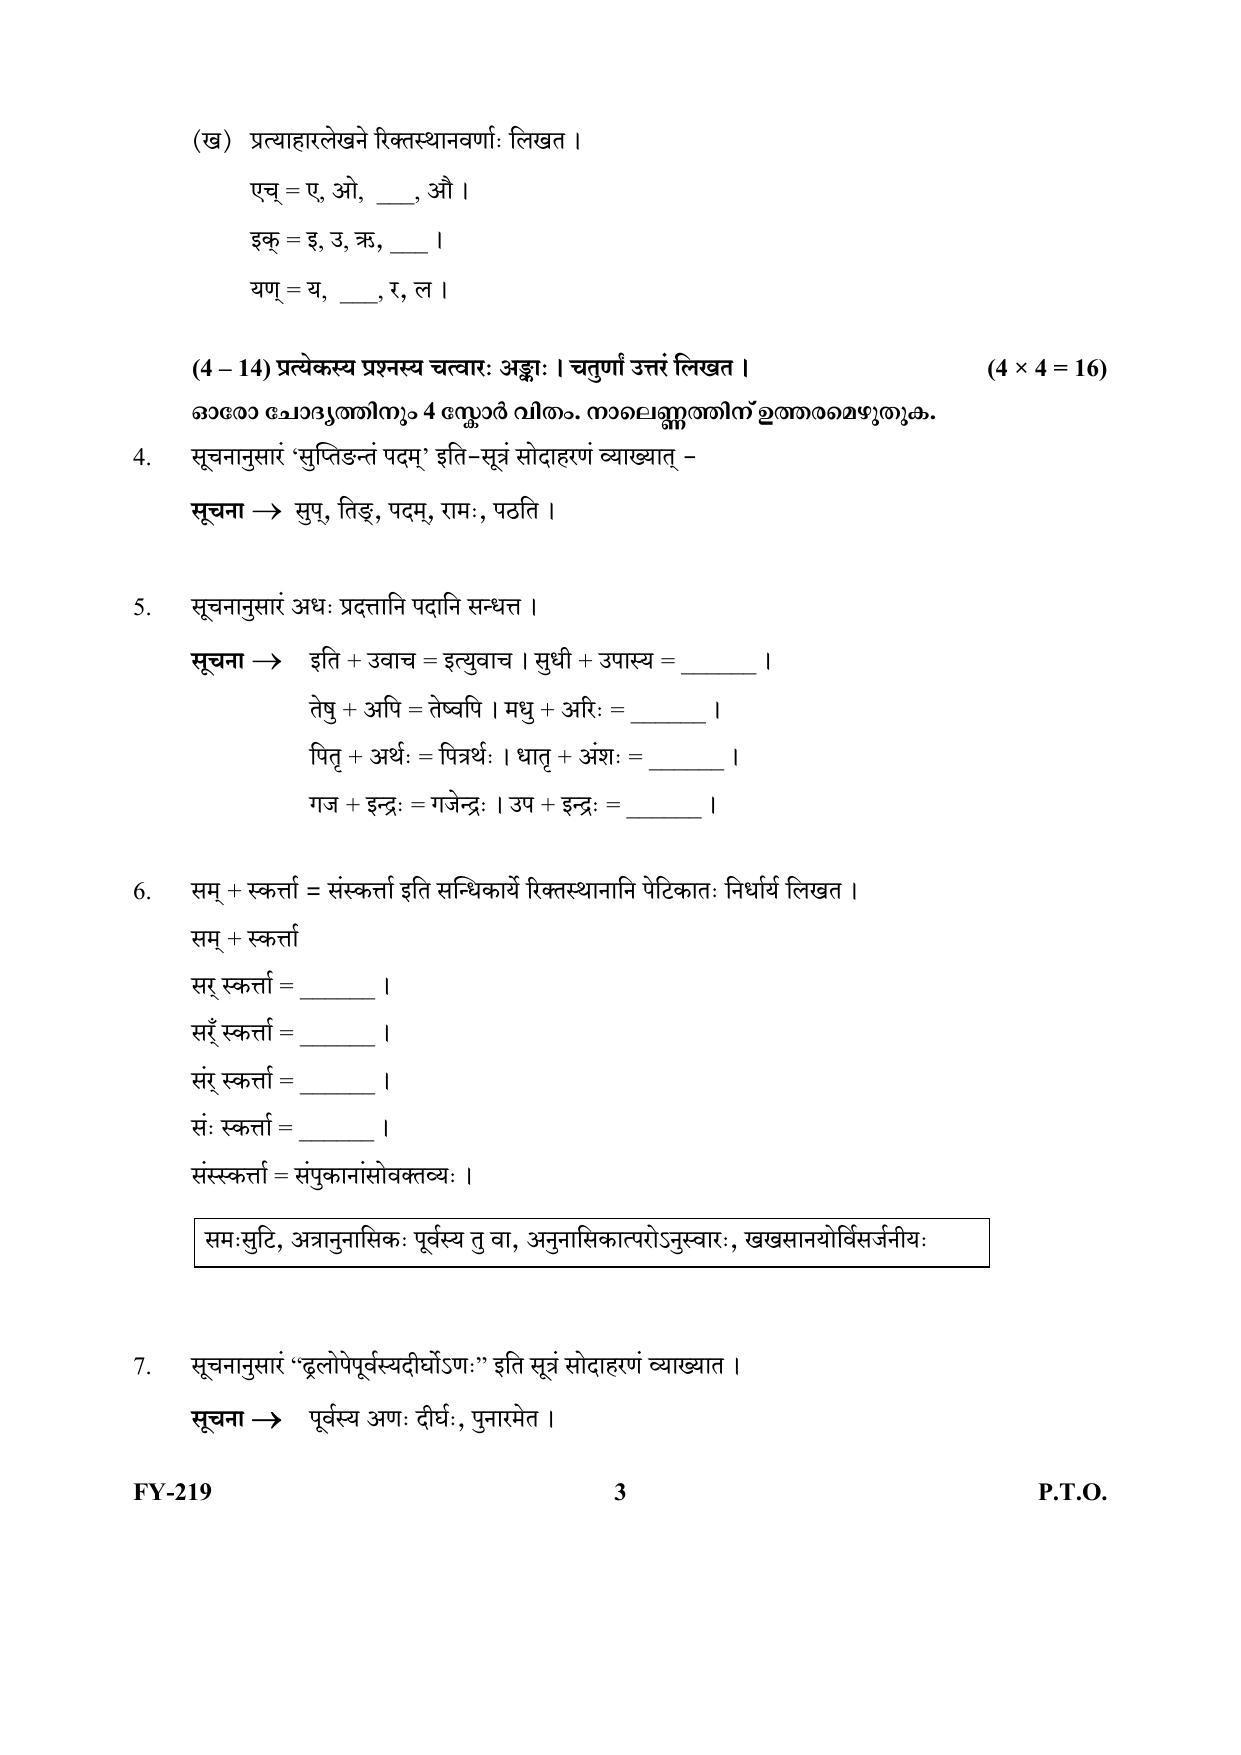 Kerala Plus One (Class 11th) Part-III Sanskrit Sasthra-Optional Question Paper 2021 - Page 3